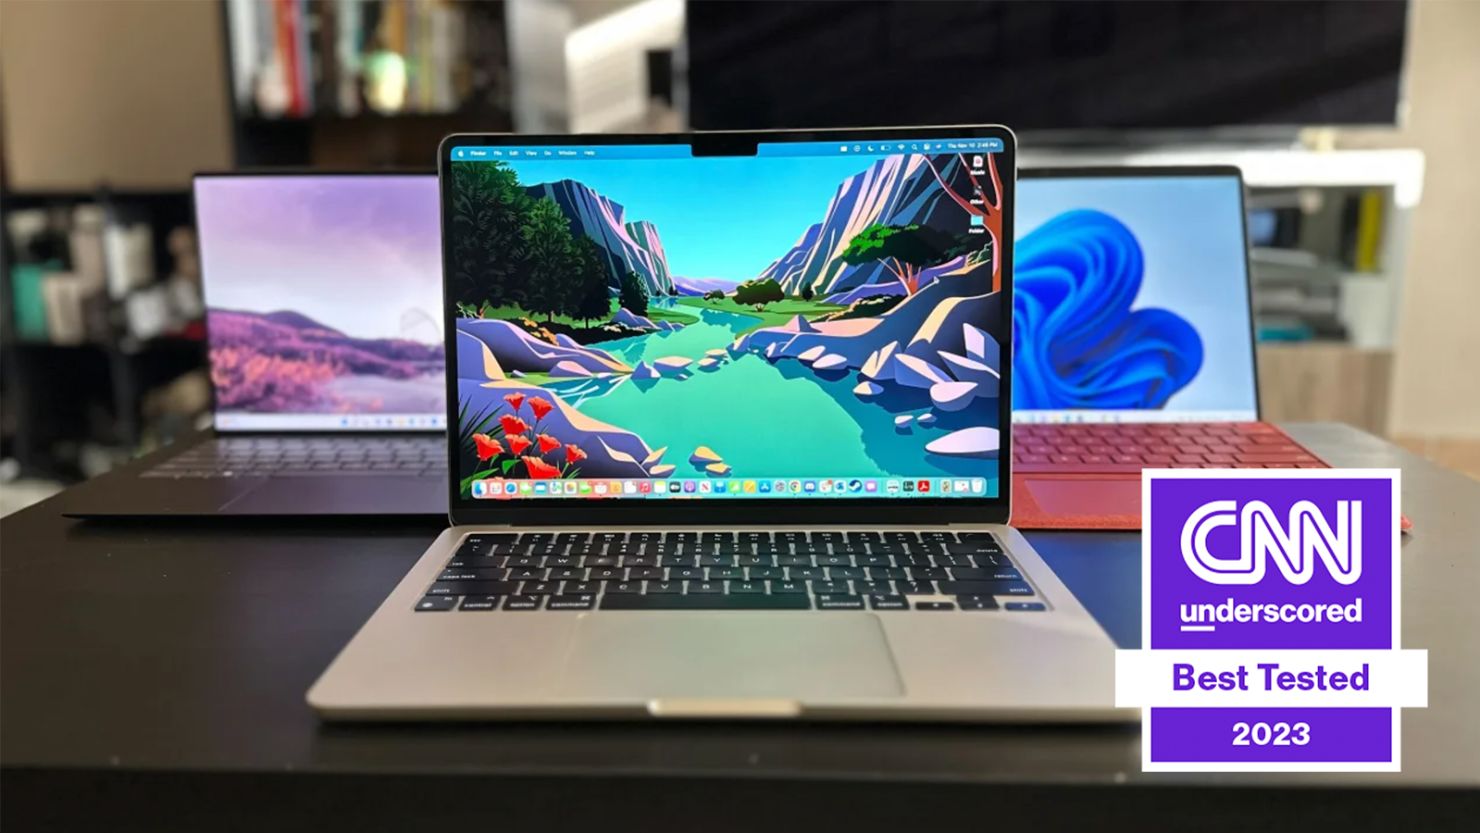 Review: Is the Macbook M1 Pro the best laptop for photographers in